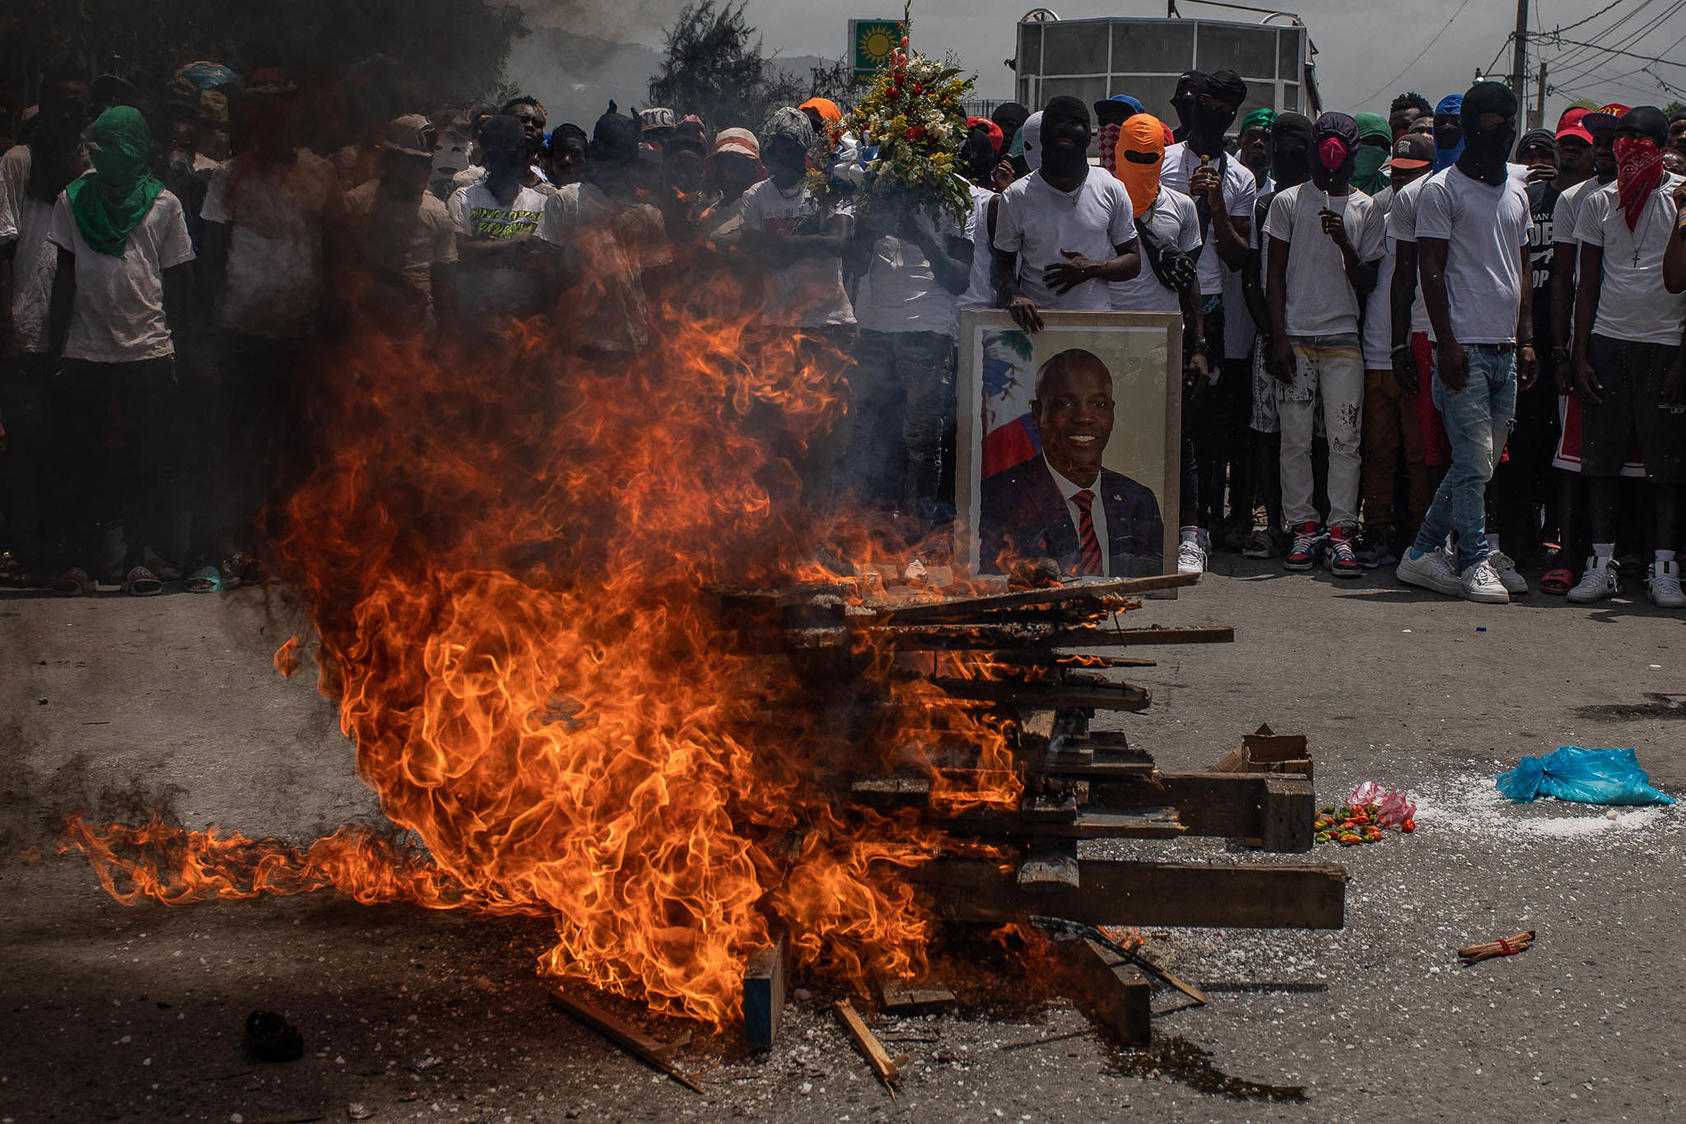 Gang members at a protest after the assassination of Haitian President Jovenel Moïse, in Port-au-Prince, July 26, 2021. (Victor Moriyama/The New York Times)